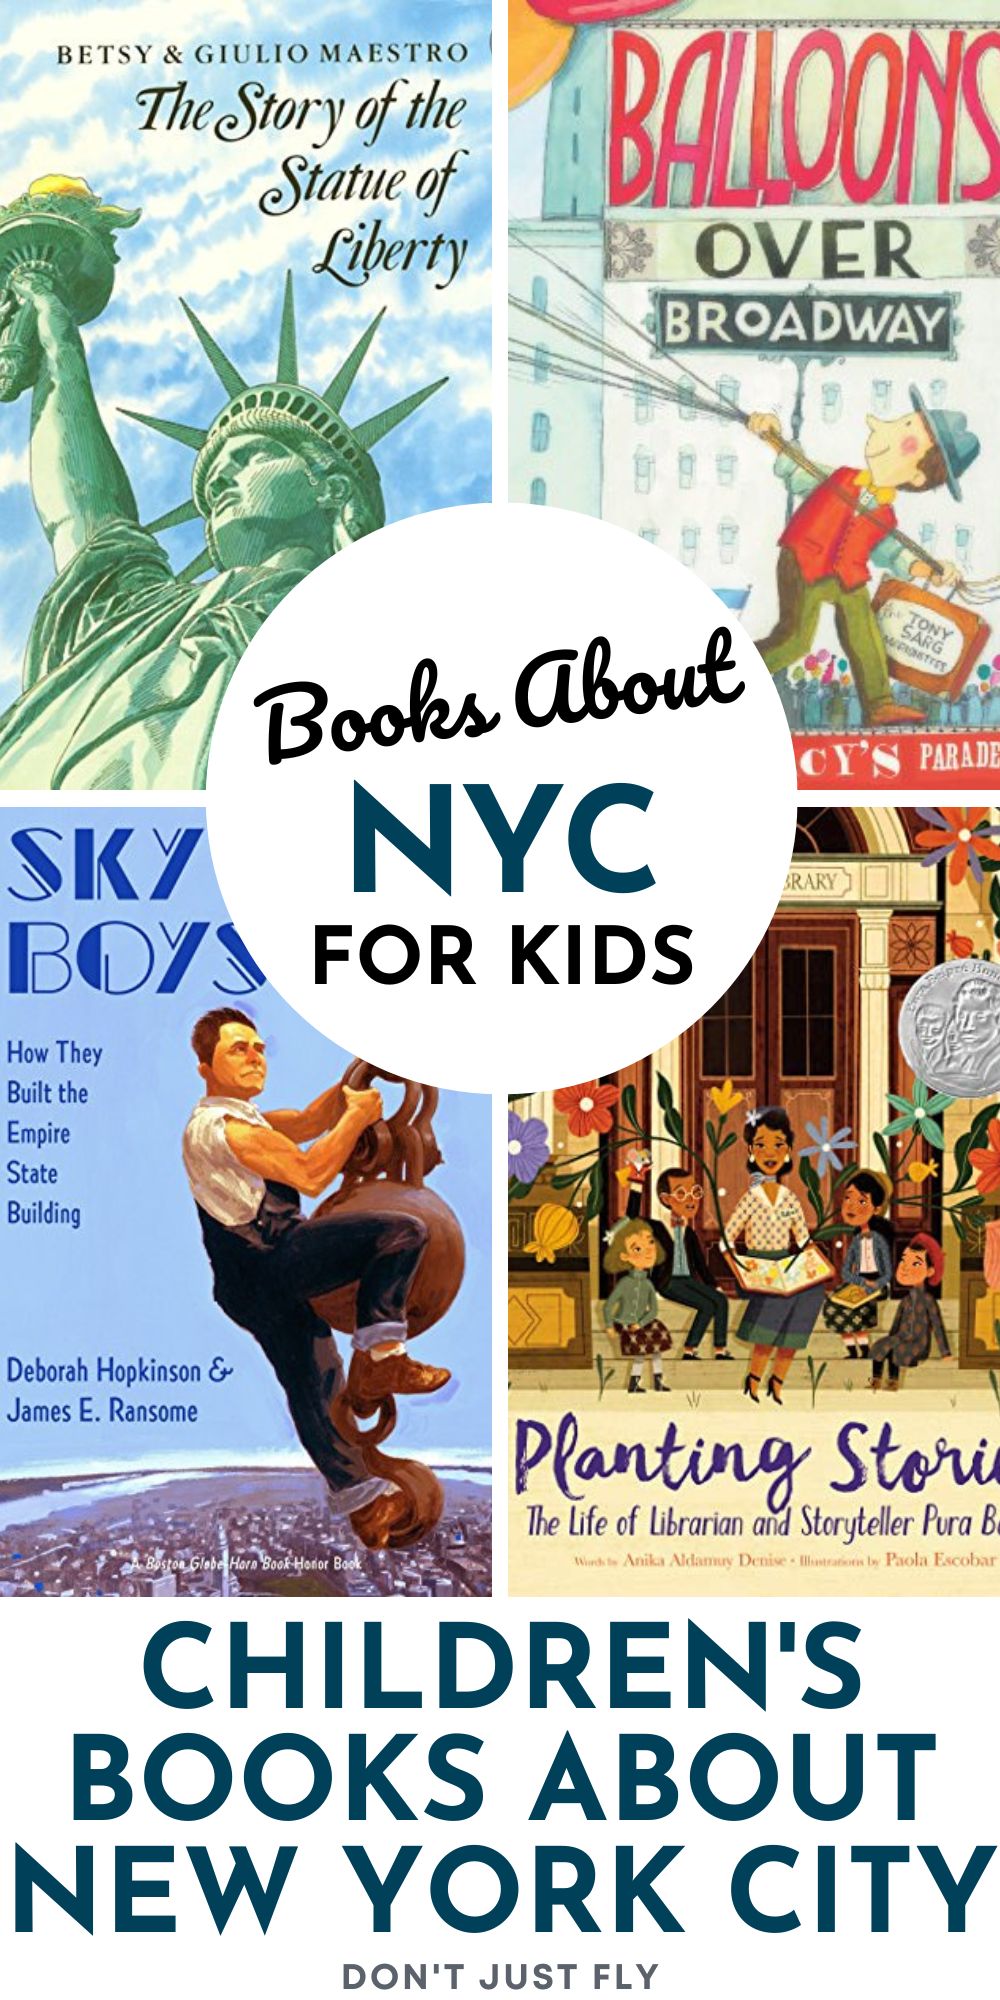 A photo collage shows several picture books about New York for kids.